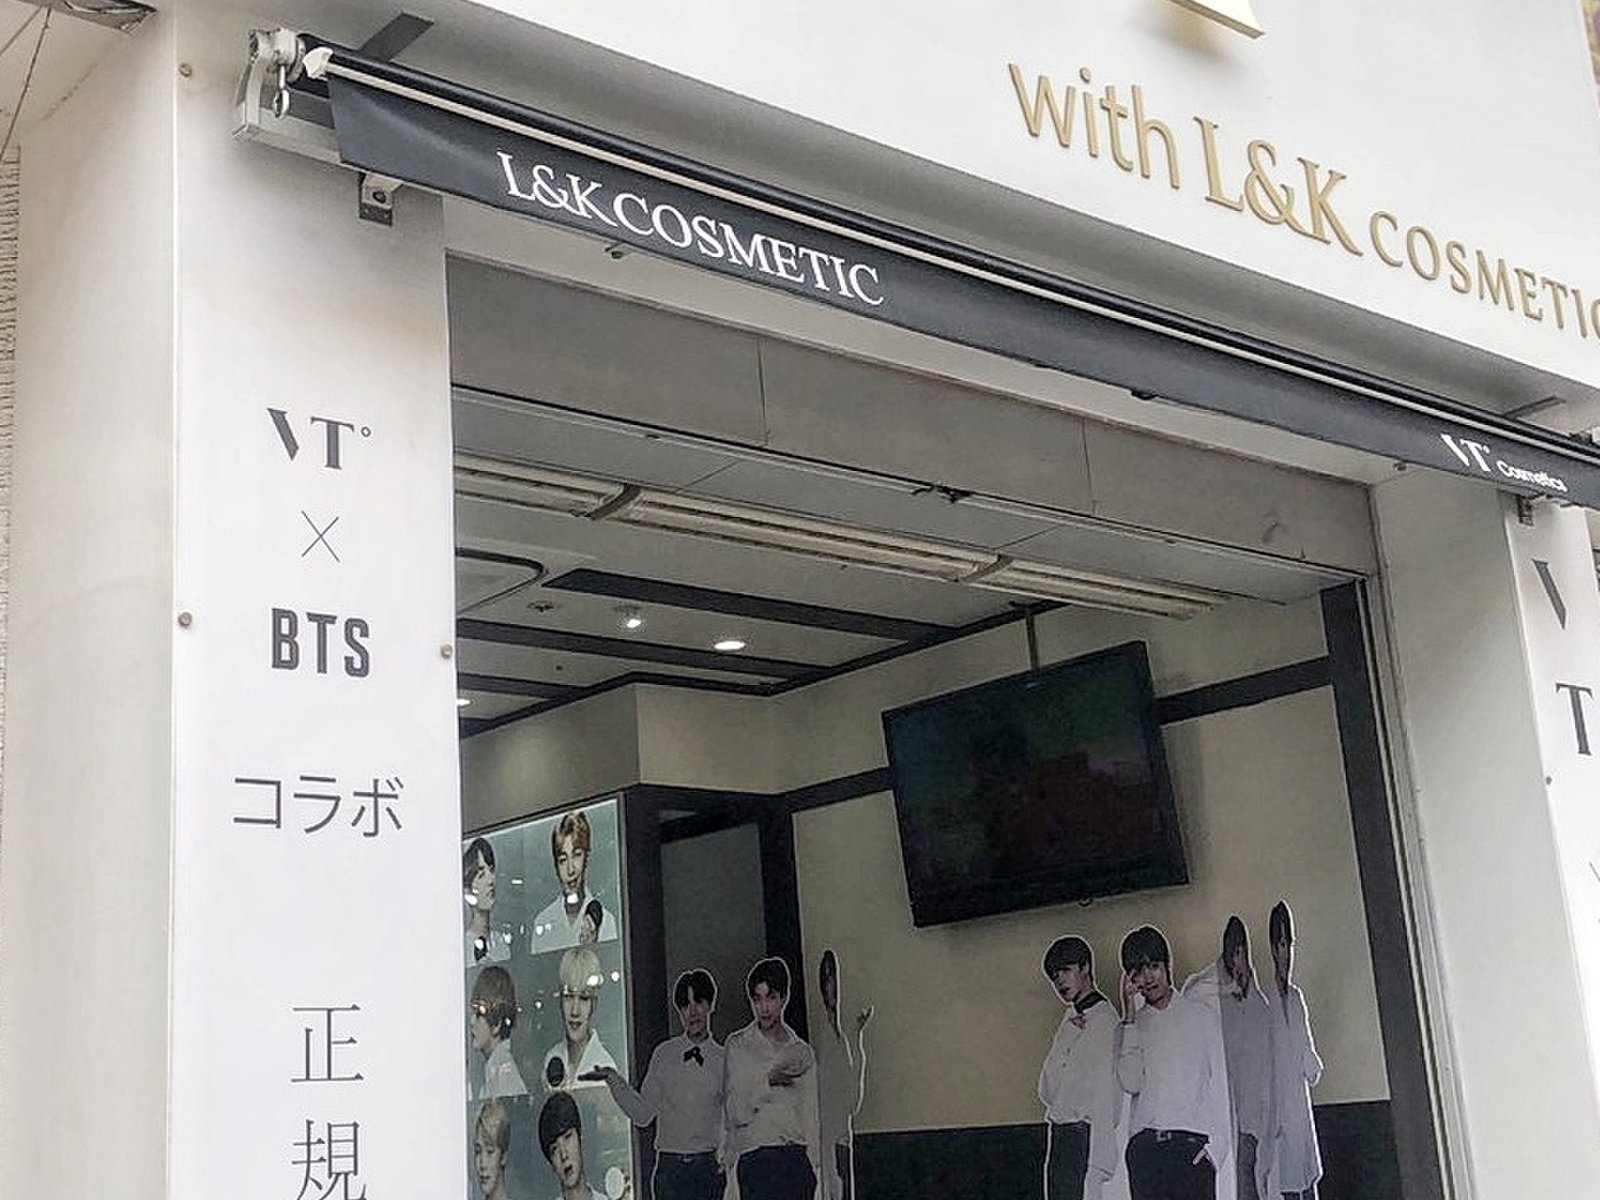 VT Cosmetics with L&K cosmetic